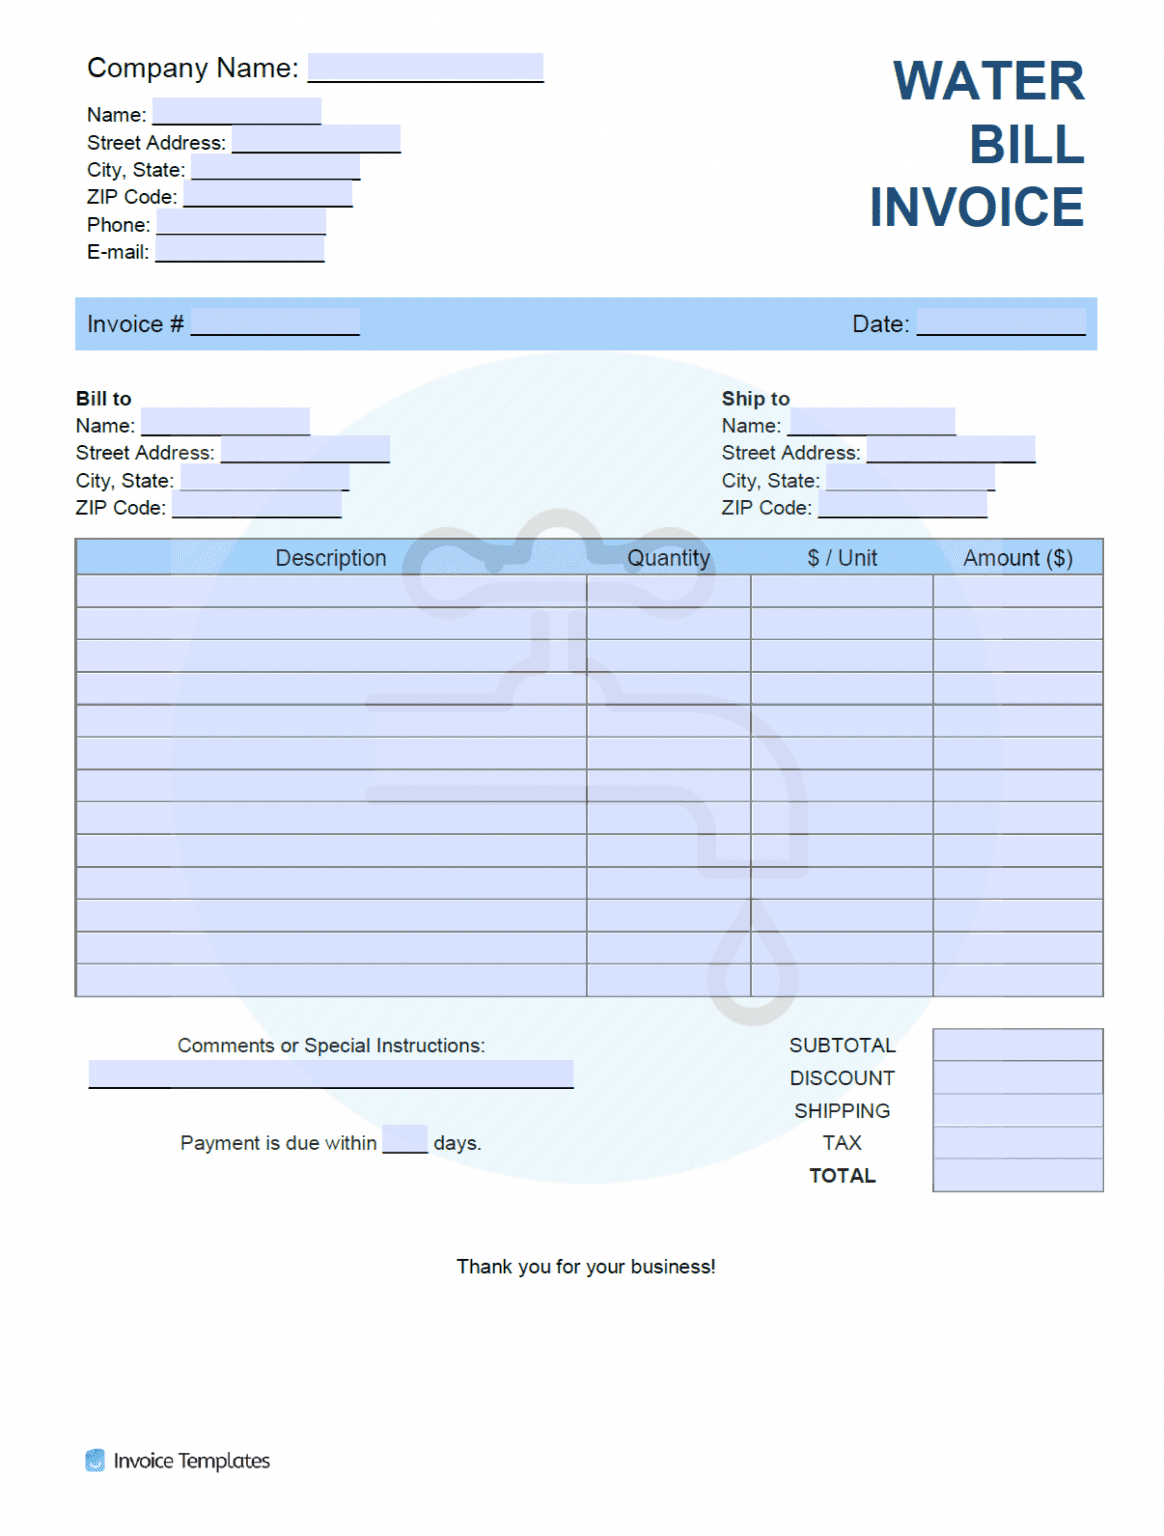 Billing Invoice Template PDF WORD EXCEL